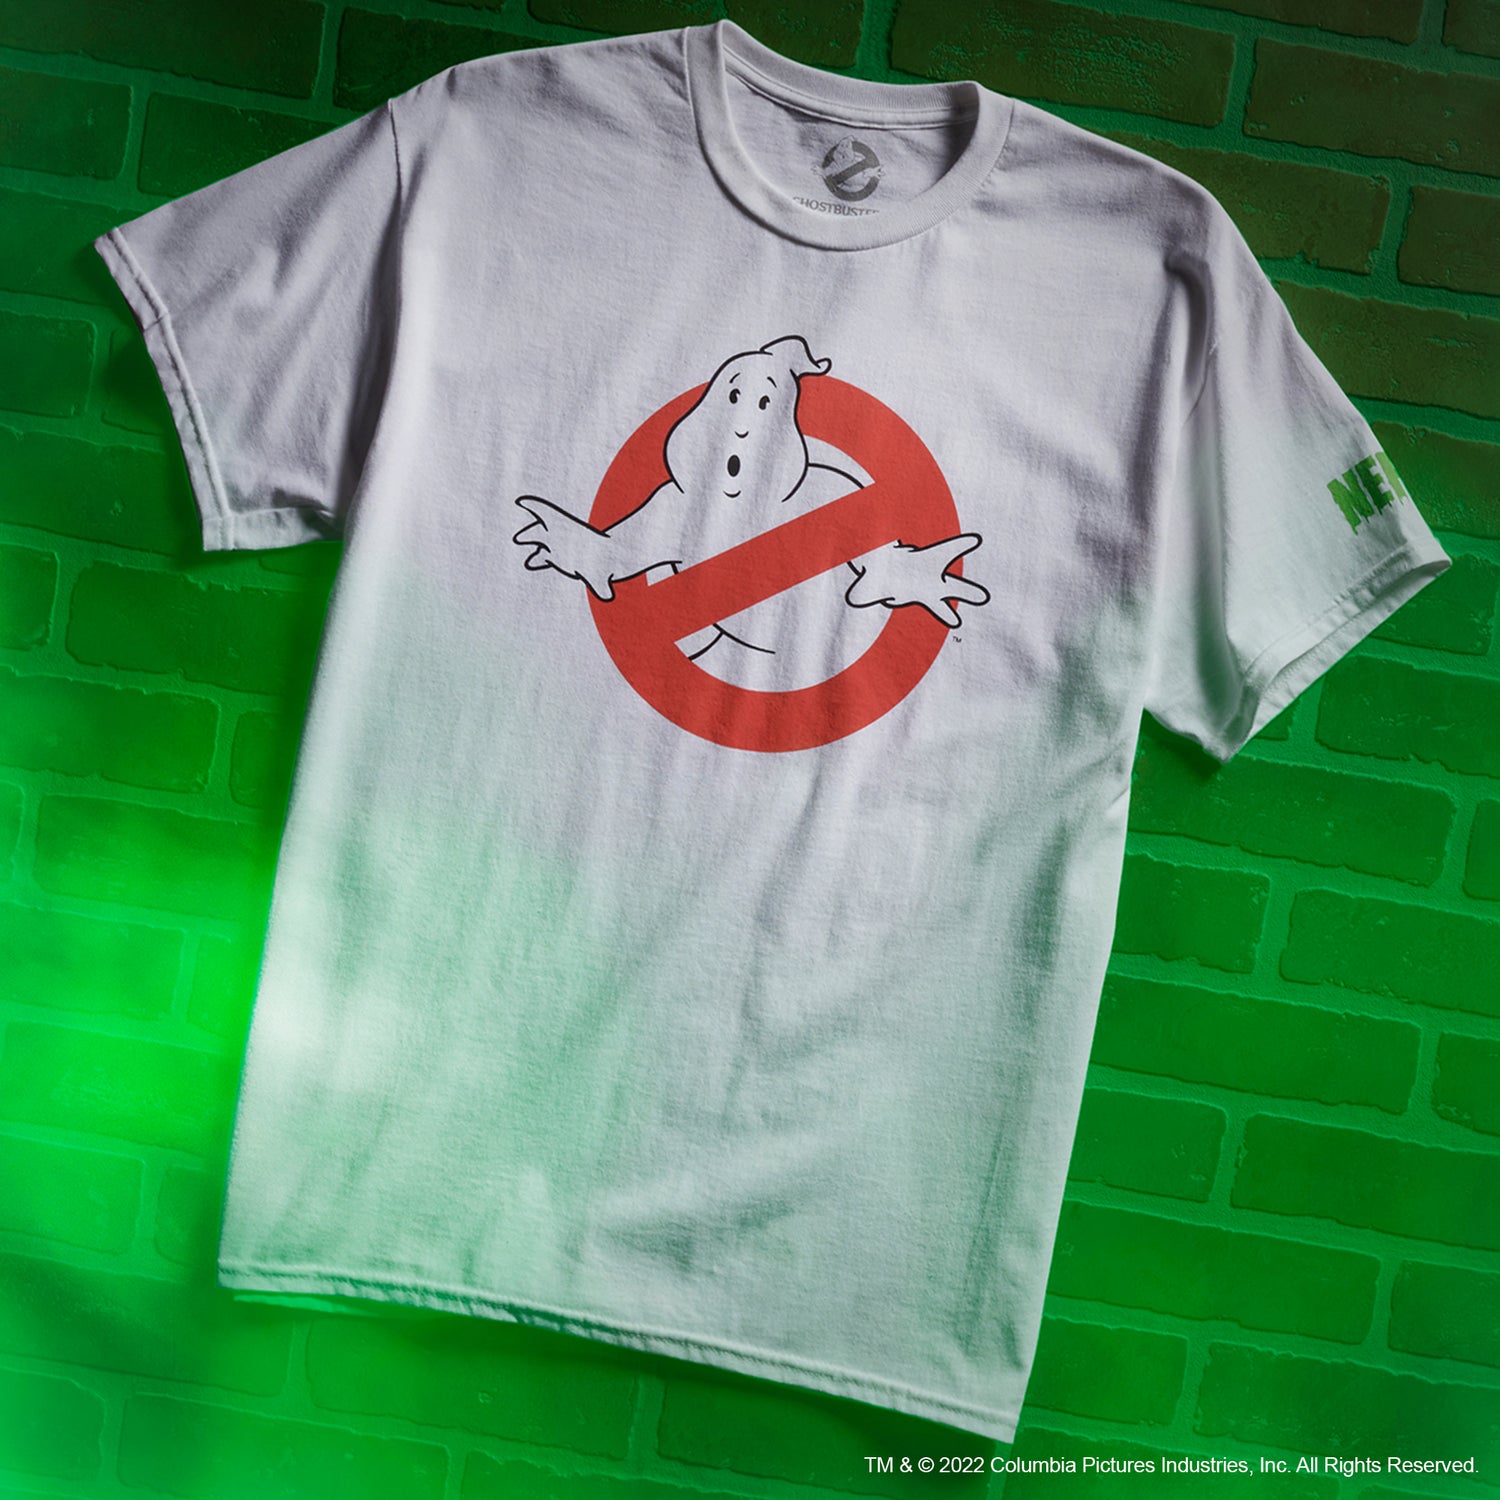 NEFF x GHOSTBUSTERS NO GHOST LOGO TEE - WHITE